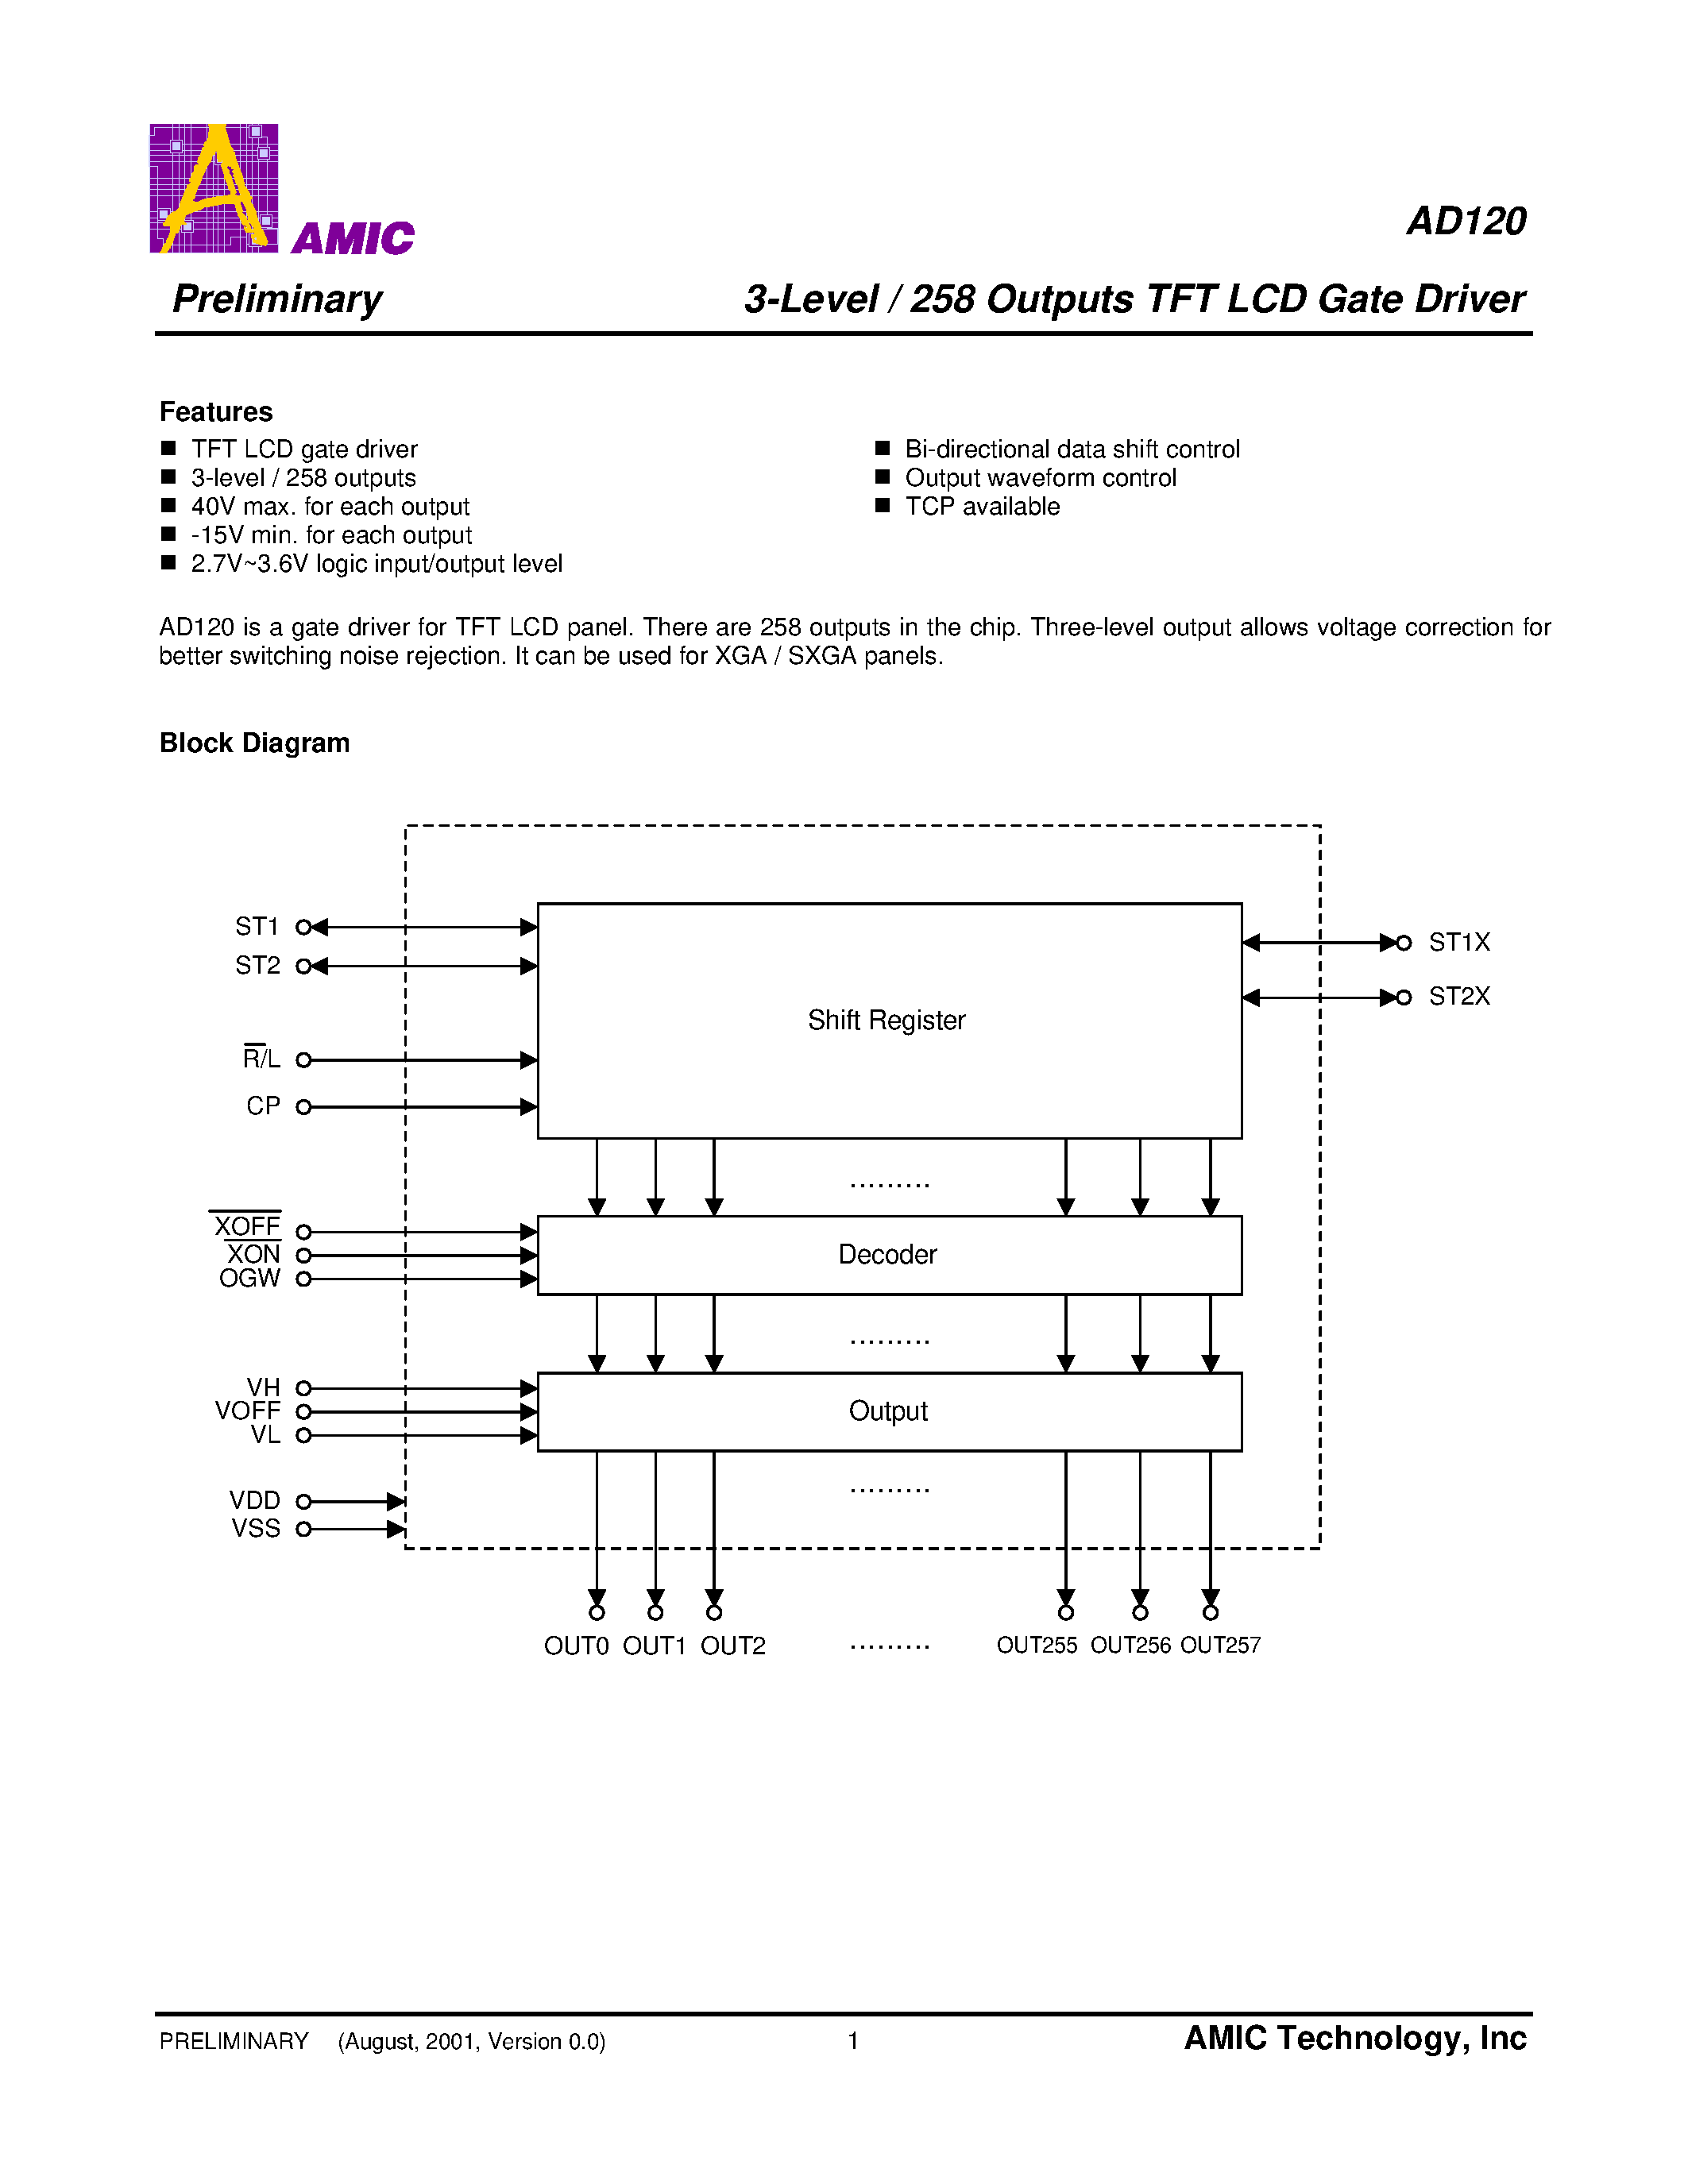 Datasheet AD120 - 3-Level / 258 Outputs TFT LCD Gate Driver page 2